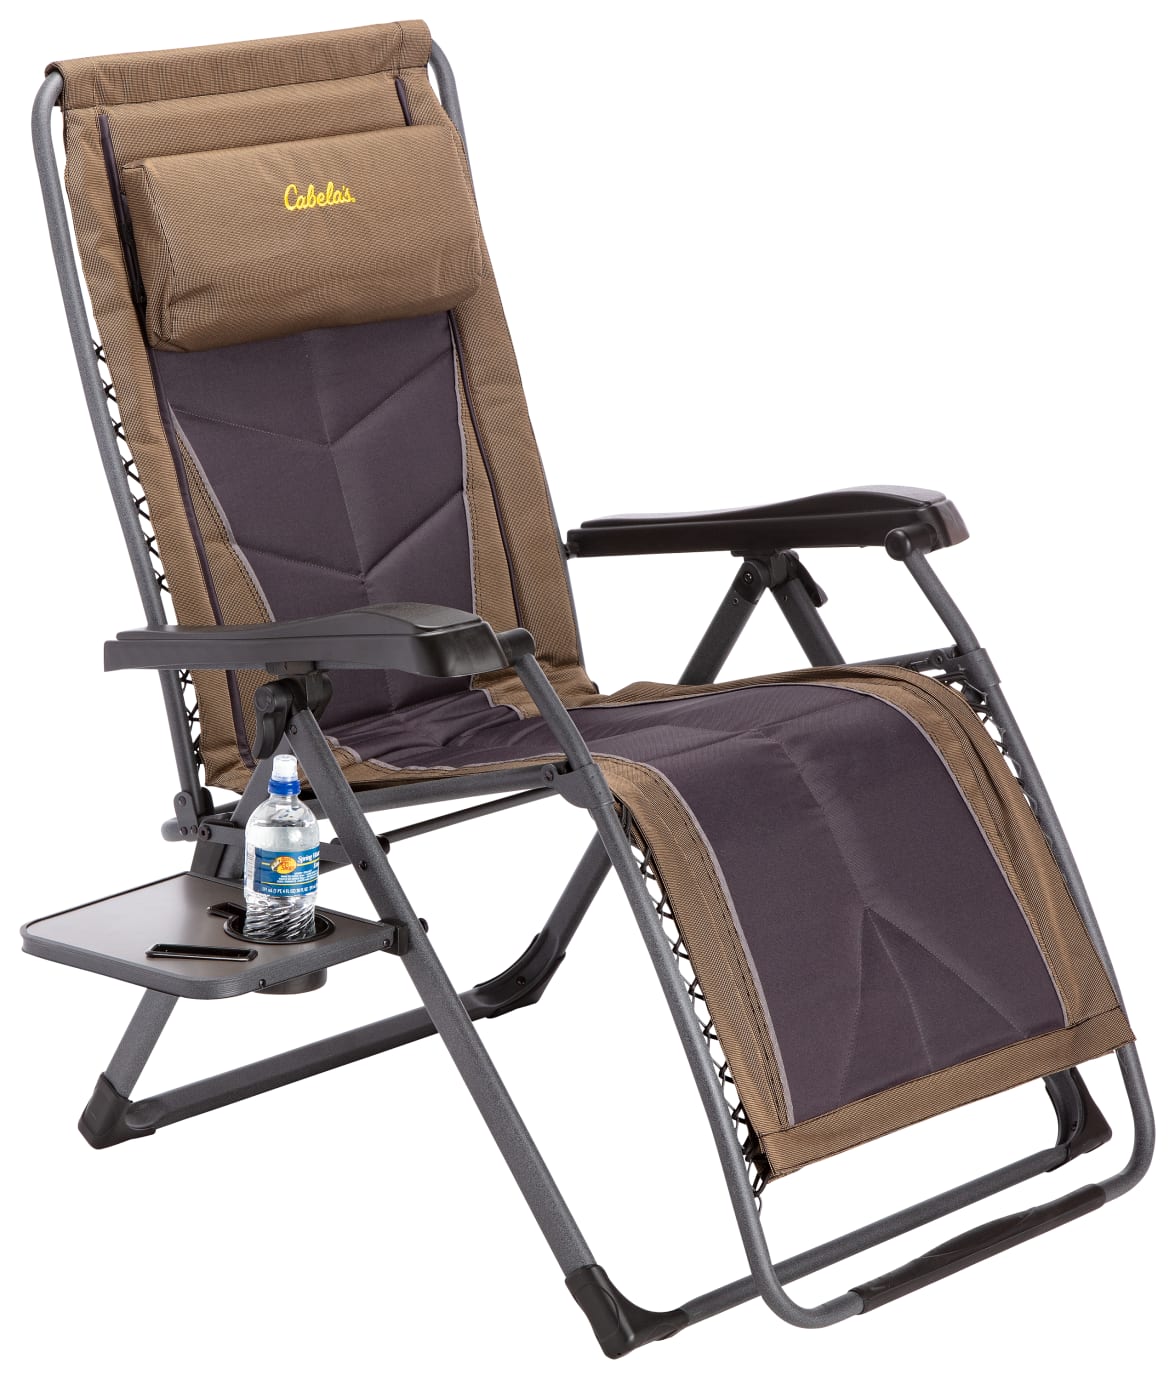 Cabela's Big Outdoorsman Lounger Chair-Black/Brown/Tan - gifts for nature lovers